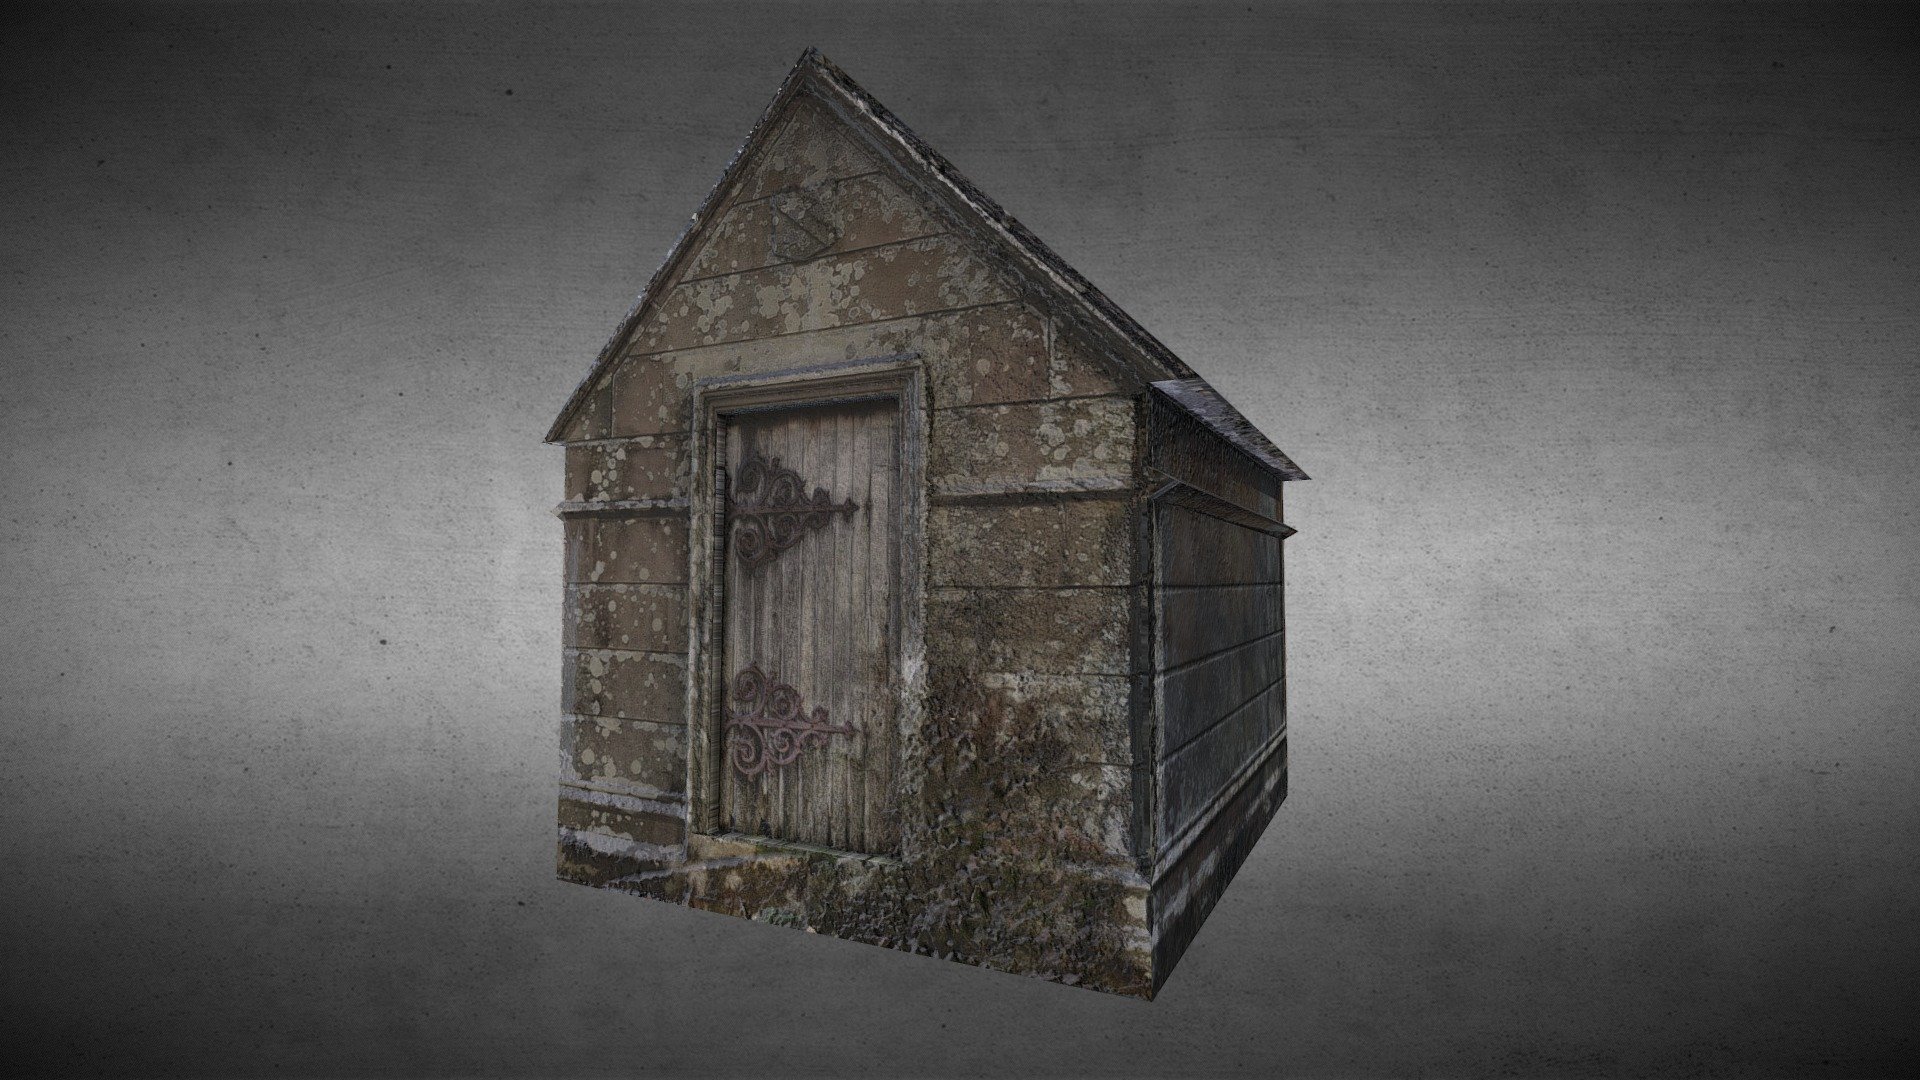 This tiny stone building, which I've referred to, possibly mistakenly, as a mausoleum, was spotted as I drove past the churchyard. It's a bleak and foreboding little place and has good access for photogrammetry.
I took 56 photos from my phone to generate a decent point cloud and then used Blender to &ldquo;trace